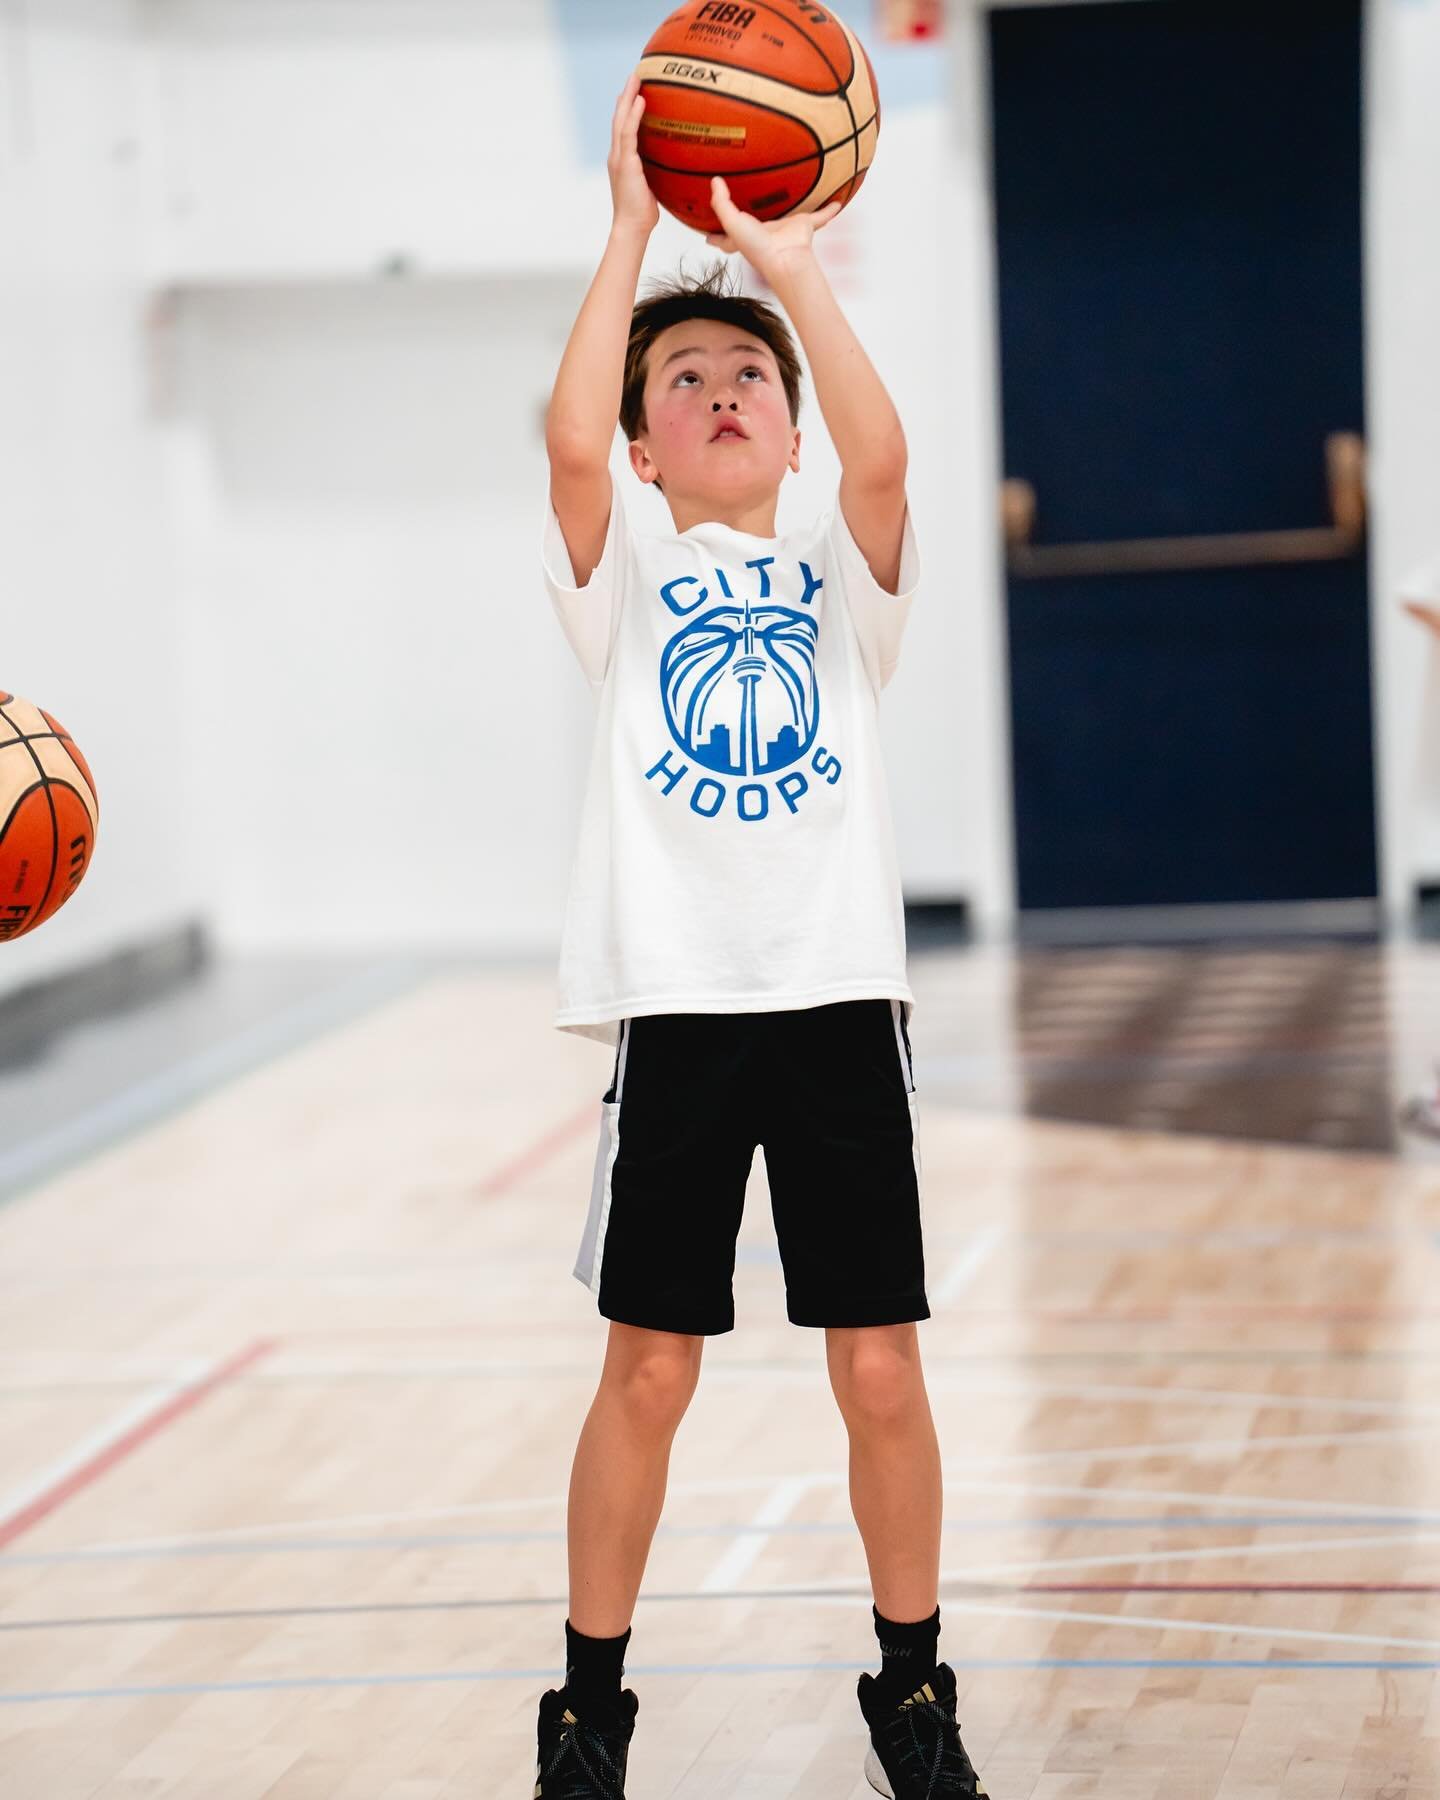 Shooting is the most important skill in basketball. Learn the proper techniques and tips from our coaches on how to become a better shooter.

Check out our Hoop Sessions! Spring Term 2 starts in 2 weeks.

#CityHoops #Basketball #Toronto #Youth #Camps